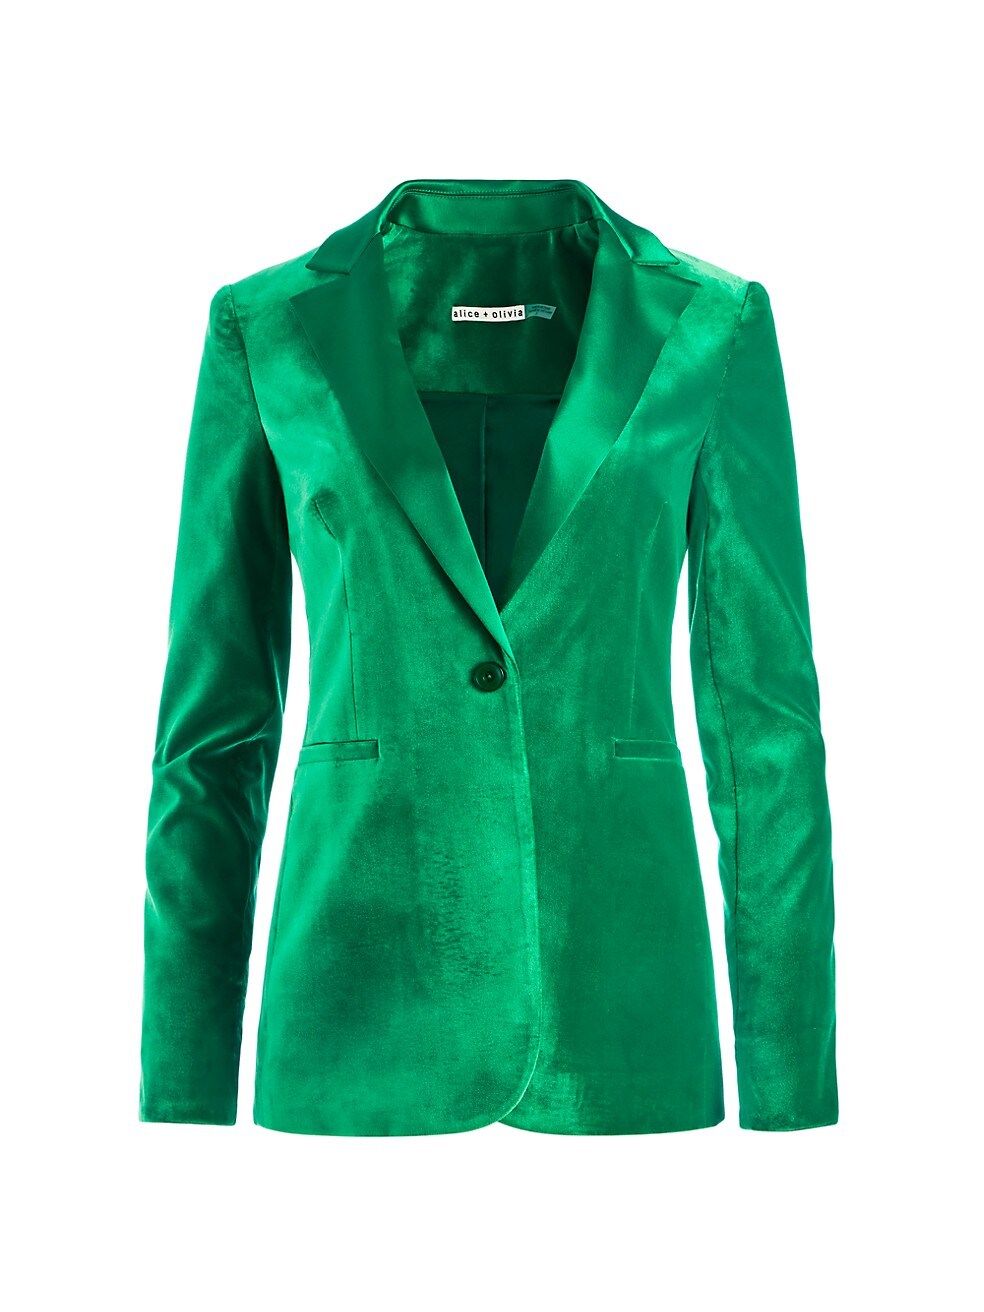 Alice + Olivia


Breann Velour Blazer



3.7 out of 5 Customer Rating


 

 

 




1 Review | Saks Fifth Avenue